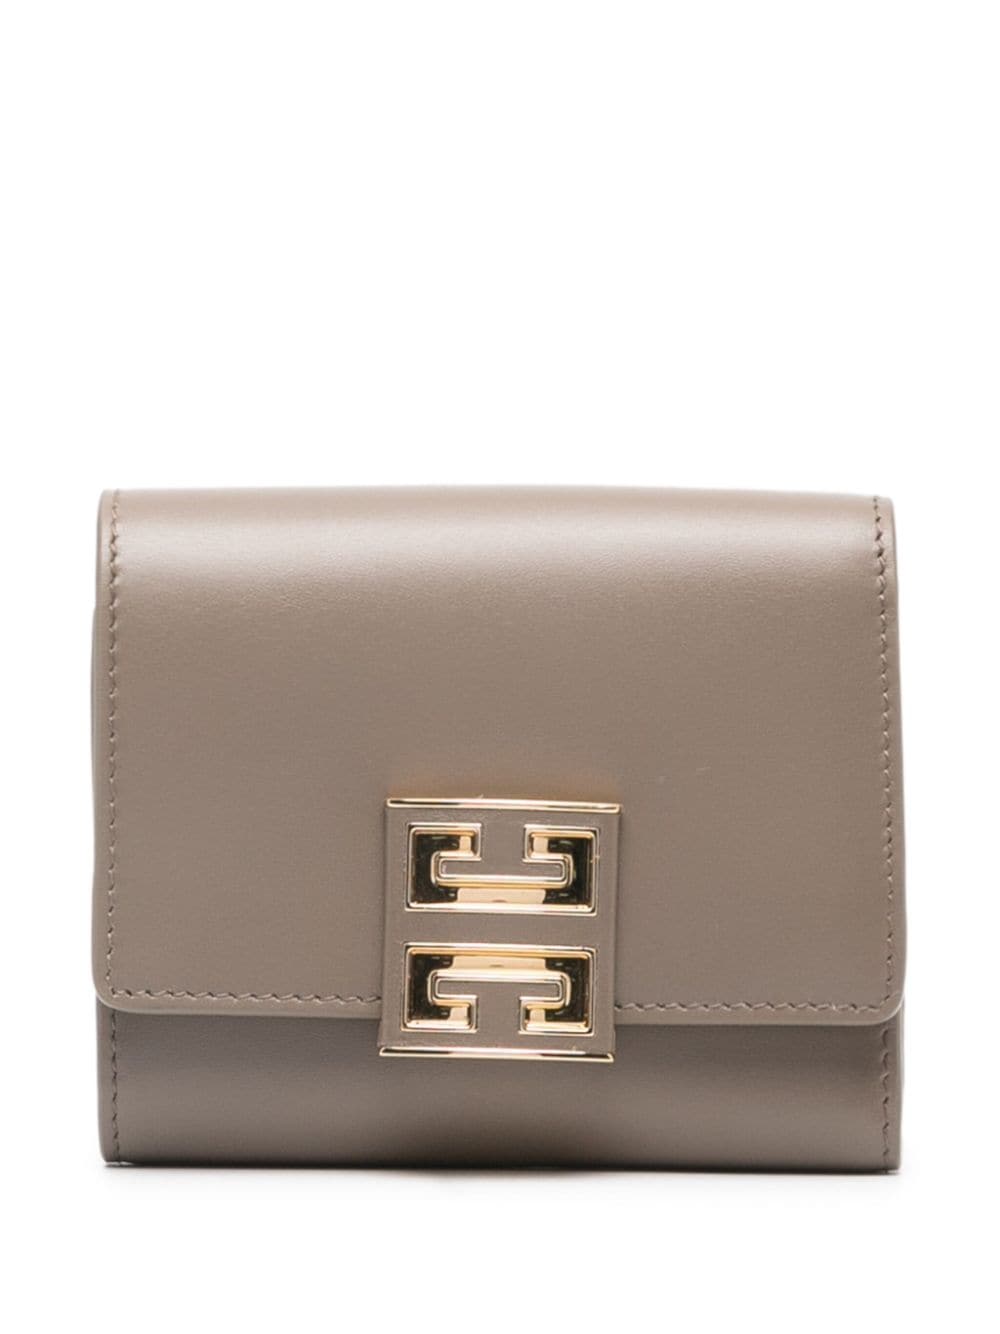 Givenchy 4G-motif leather wallet - Neutrals von Givenchy